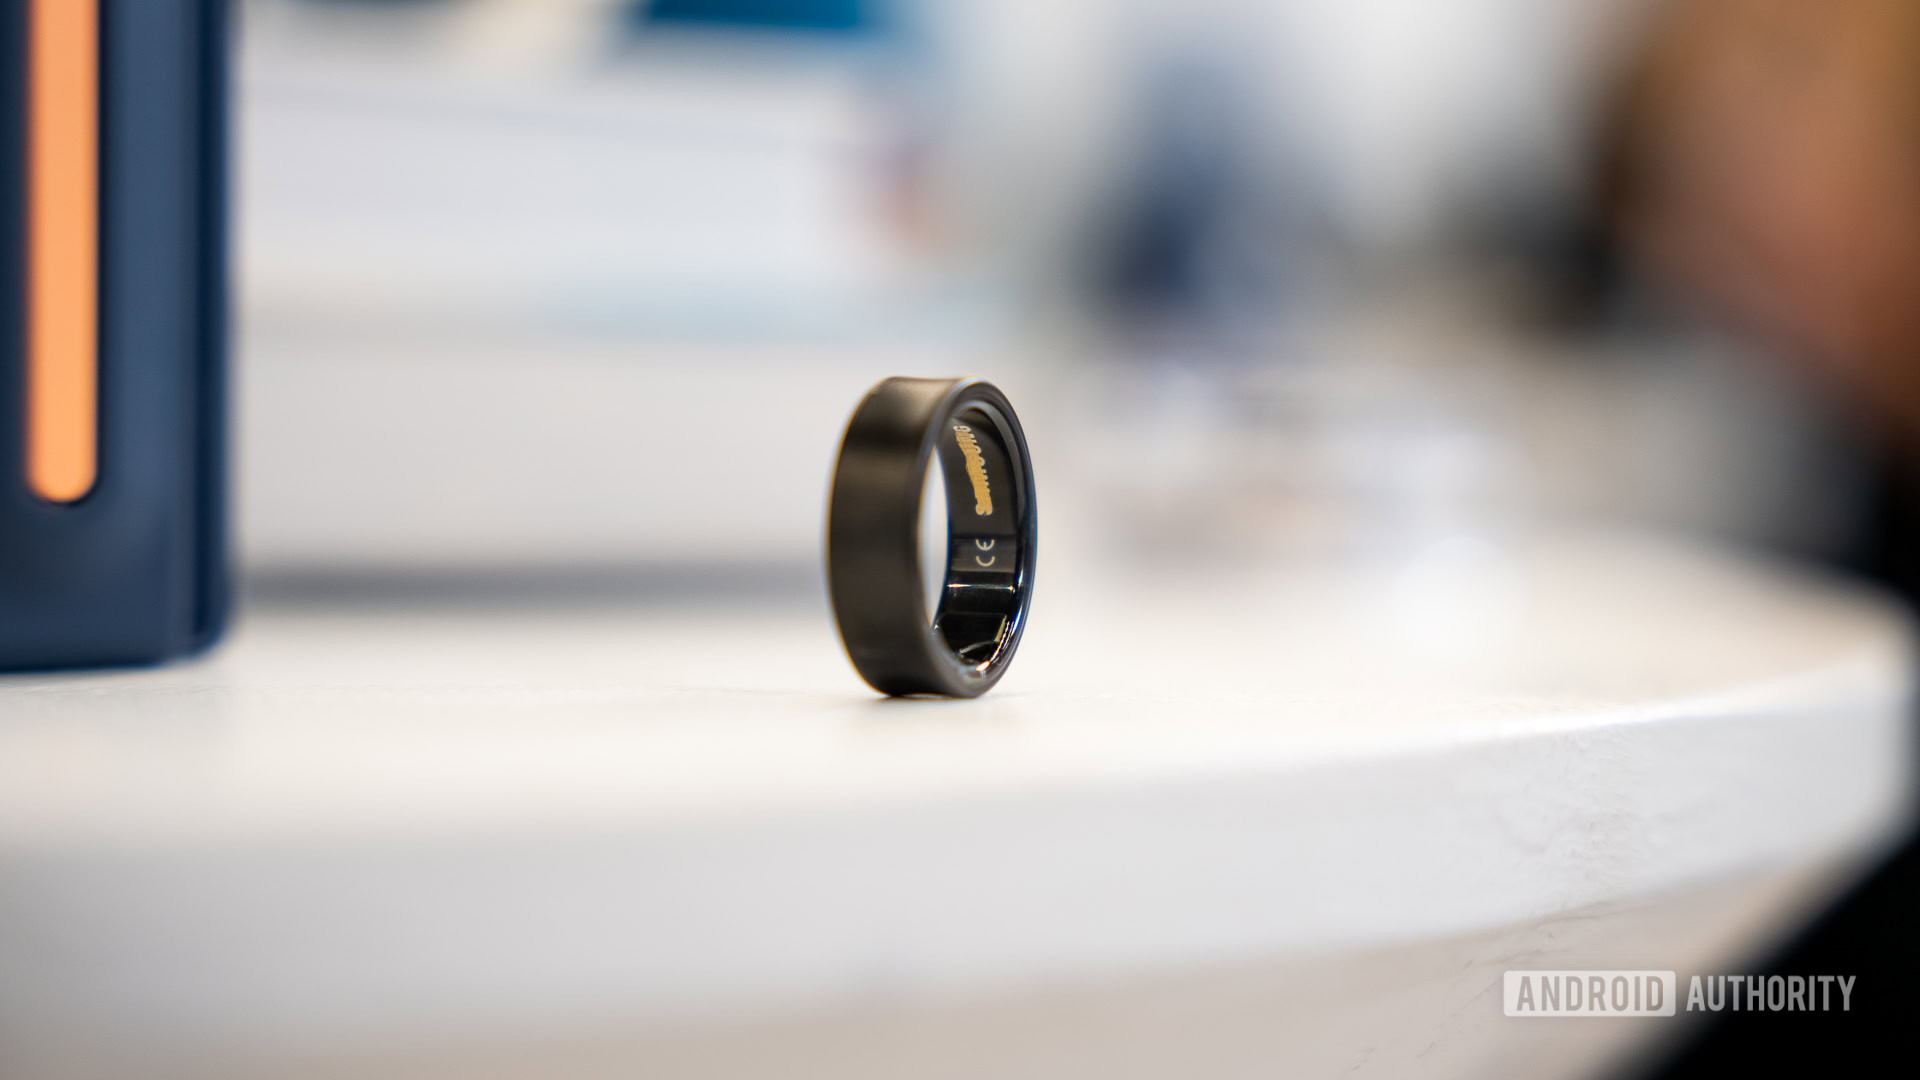 A Samsung Galaxy Ring in a Black Titanium finish rests on a table.